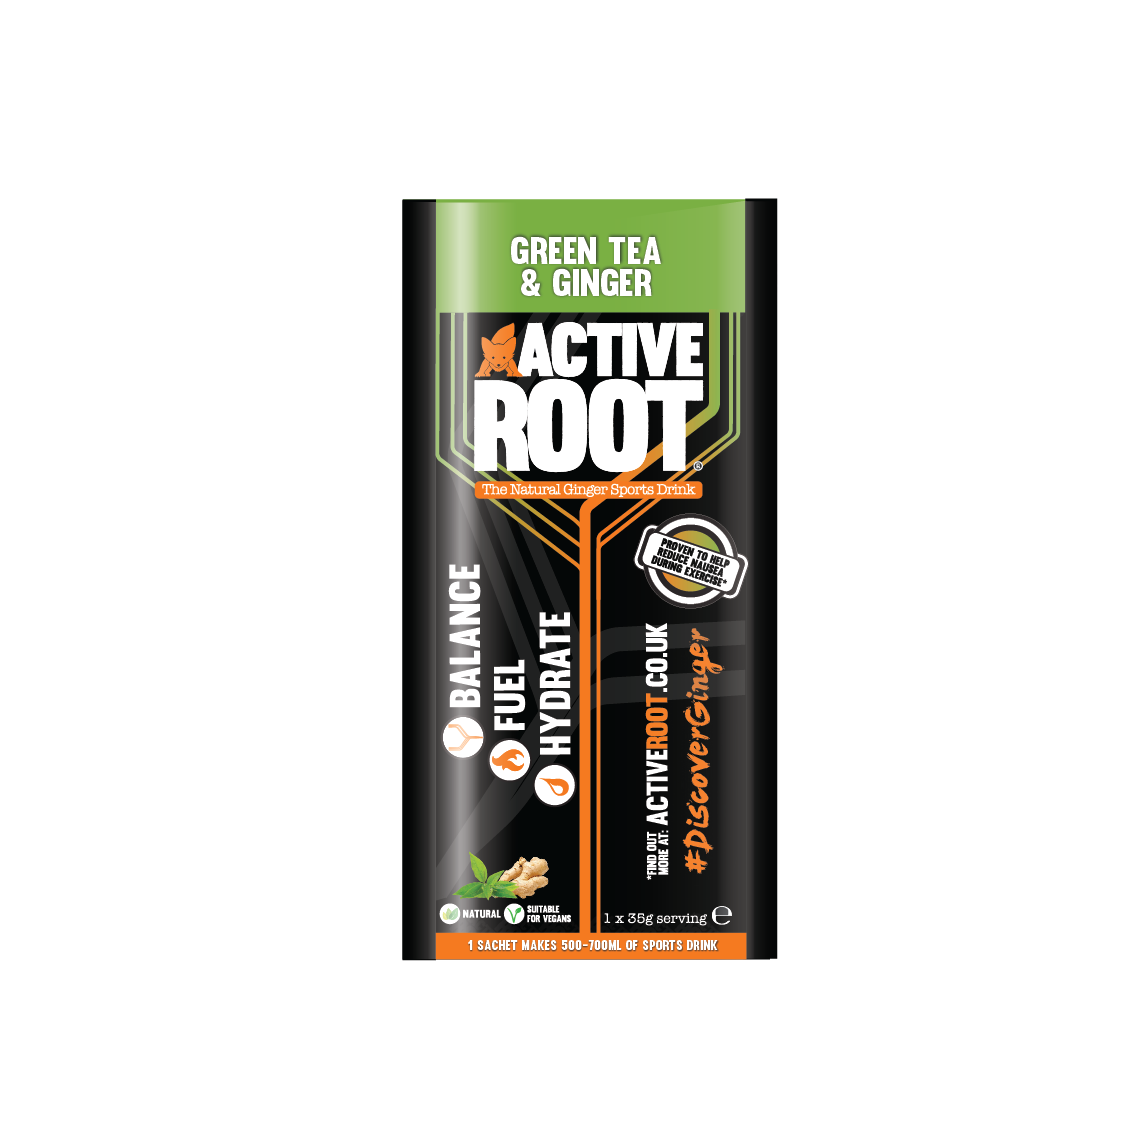 6 Sachet Pack - Green Tea & Ginger Flavour Sports Drink - Active Root